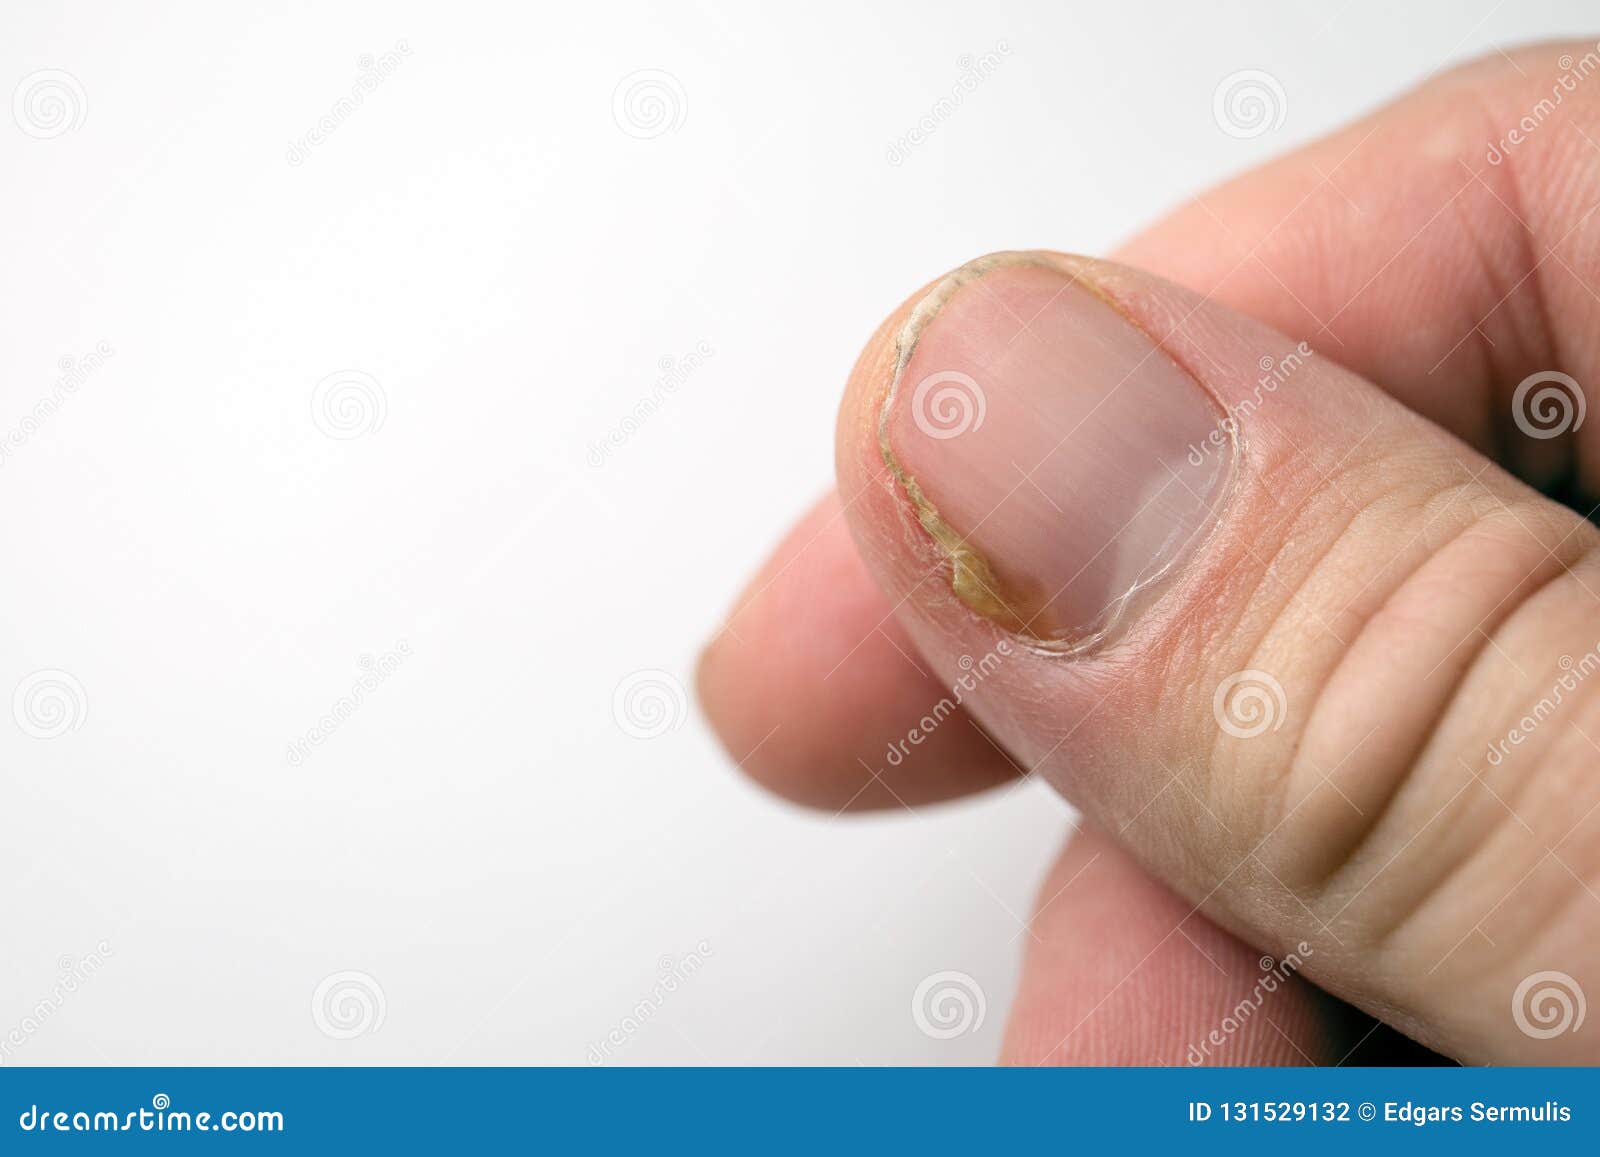 Fungus Infection On Nails Hand Finger Stock Photo 471376841 | Shutterstock